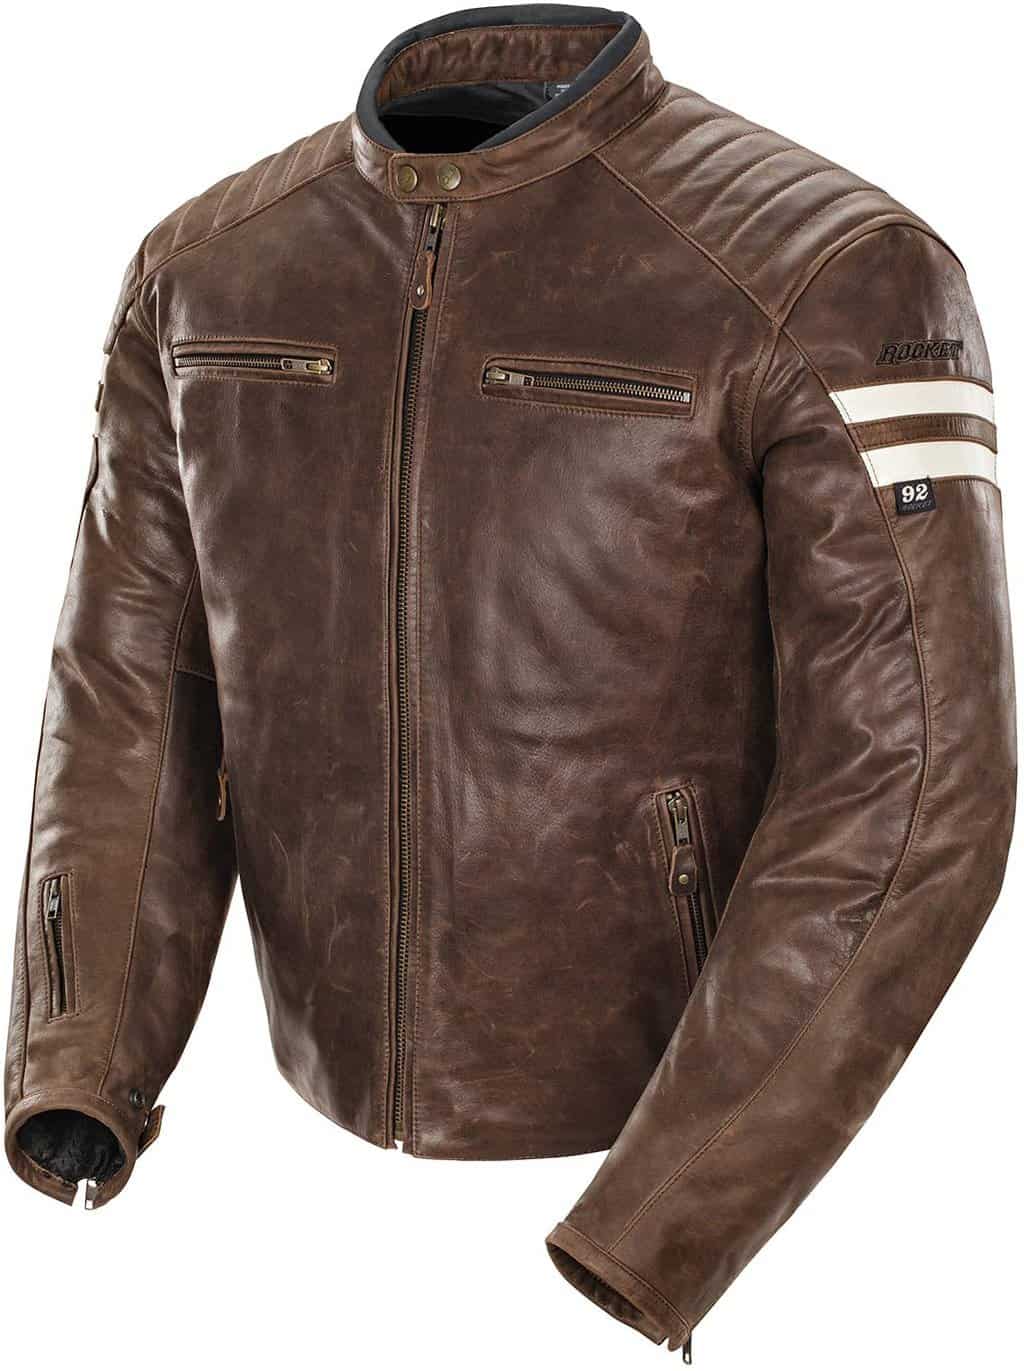 Joe-Rocket-1326-2304-Classic-’92-–-Best-Leather-Motorcycle-Jacket-with-Armor